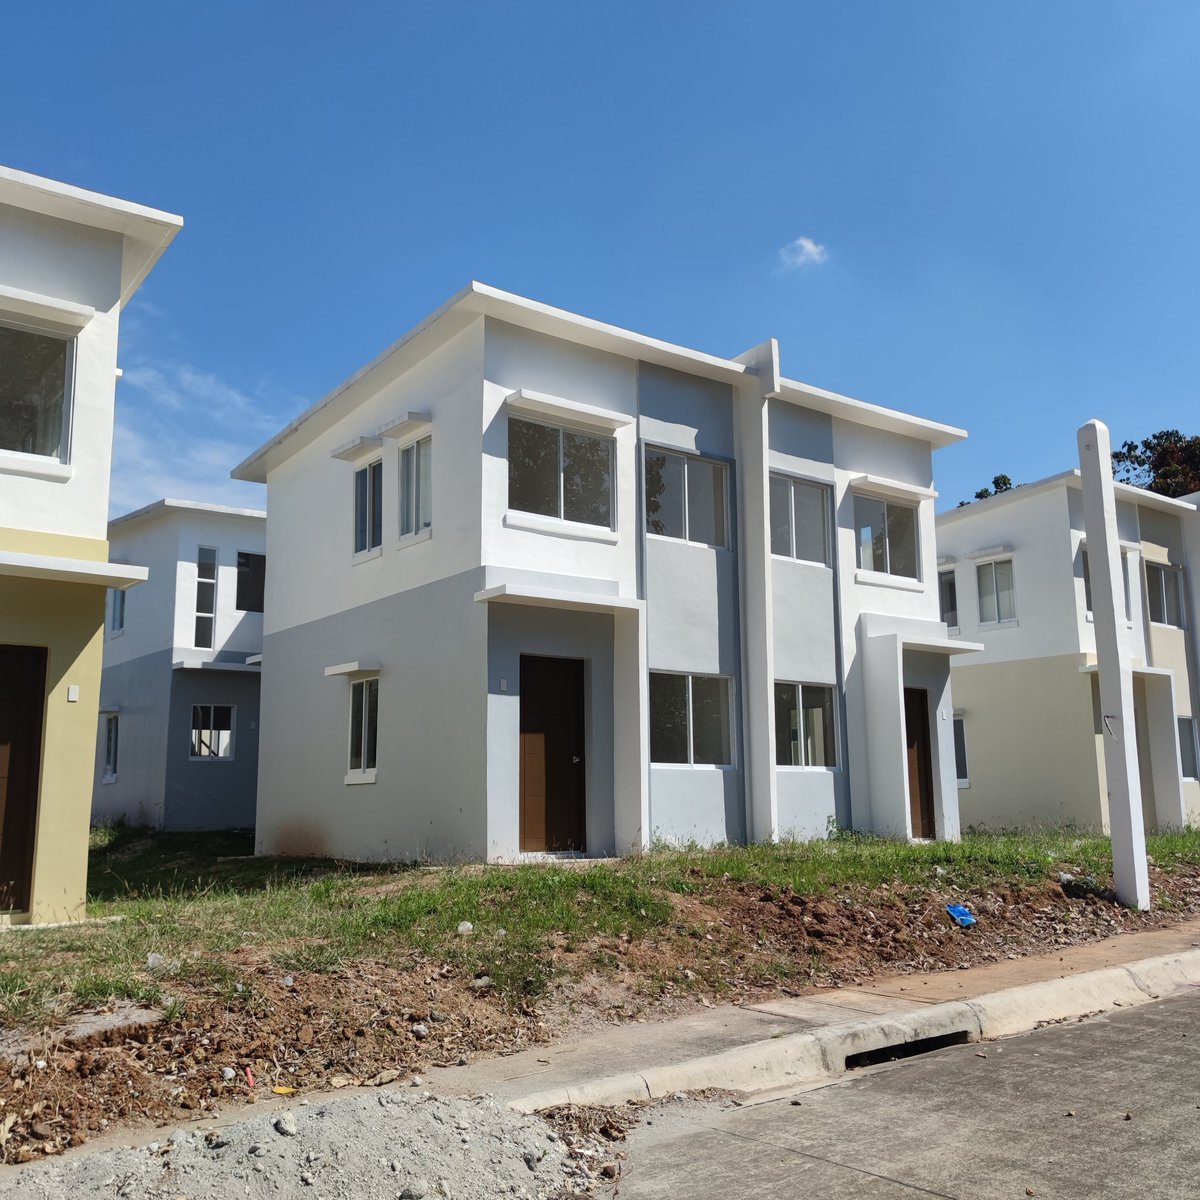 RFO 3-bedroom Duplex / Twin House For Sale in Antipolo Rizal